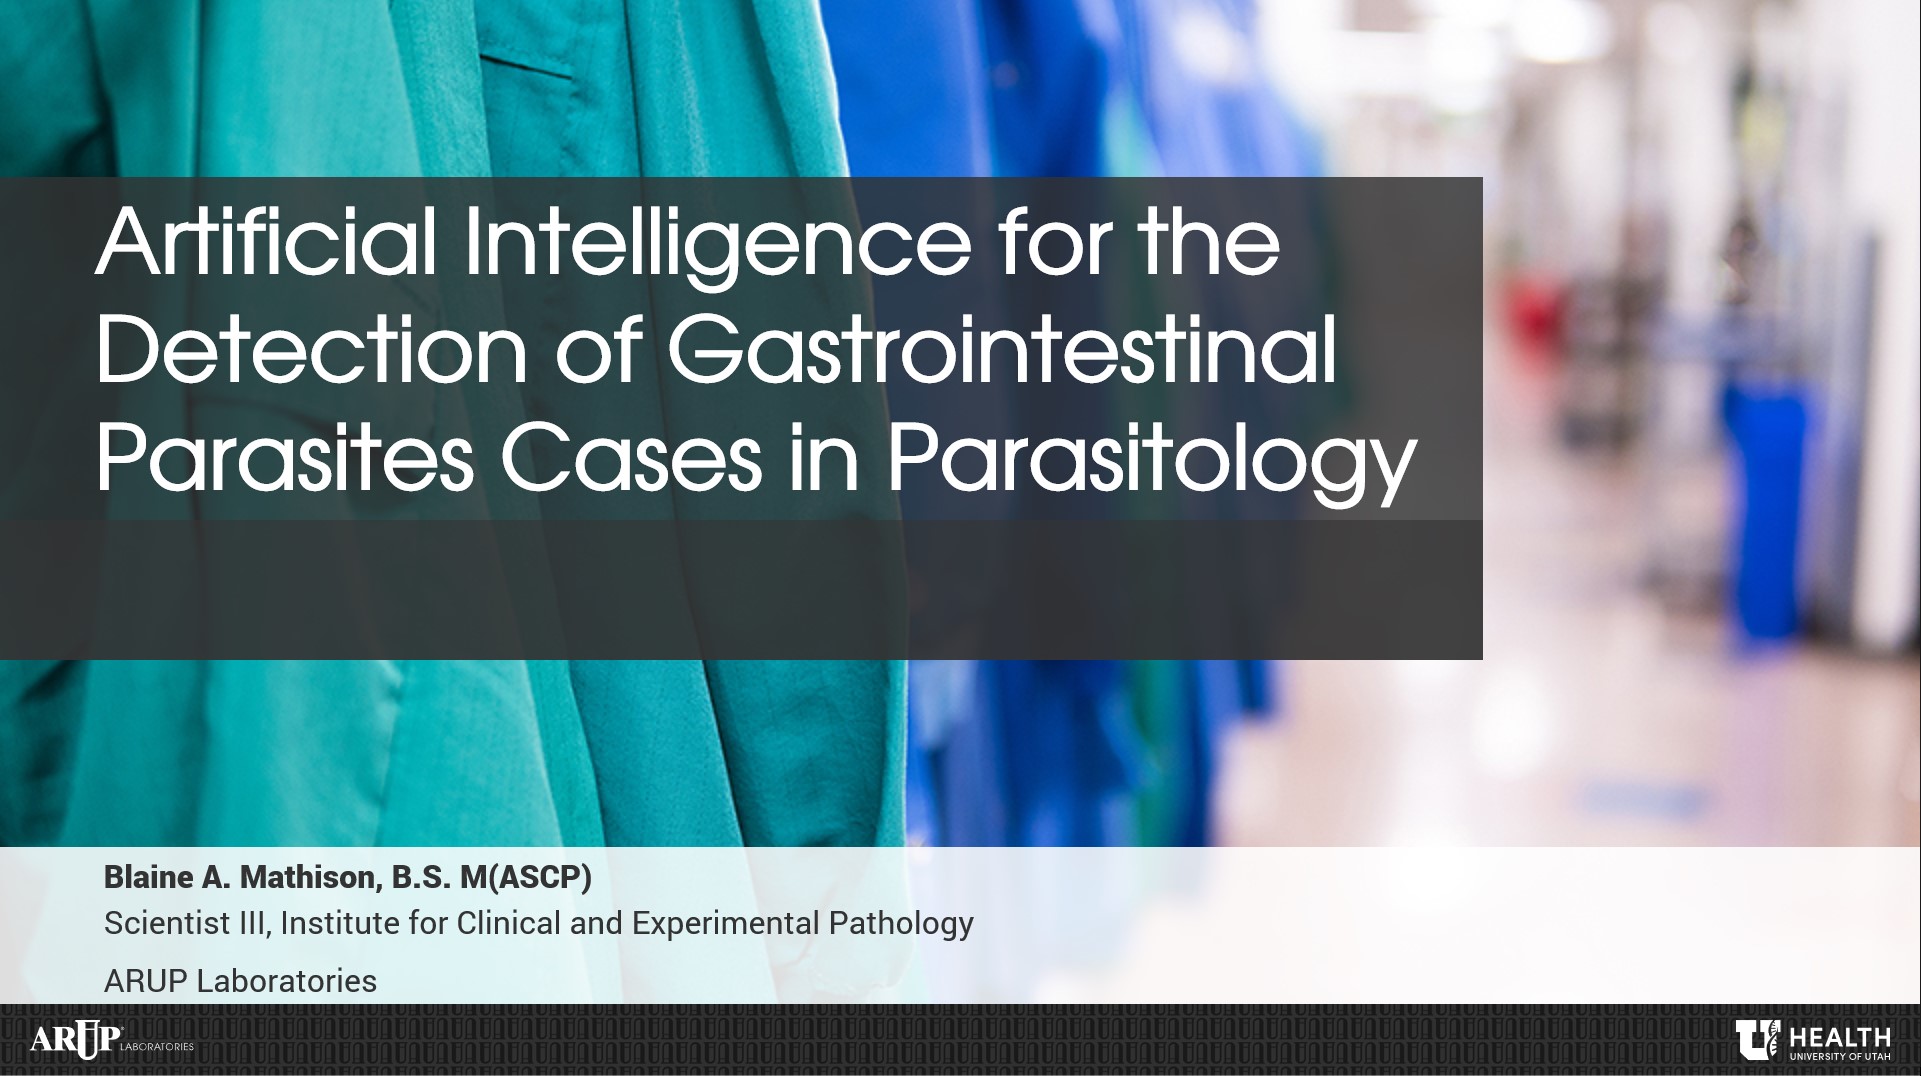 Artificial Intelligence for the Detection of Gastrointestinal Parasites Cases in Parasitology